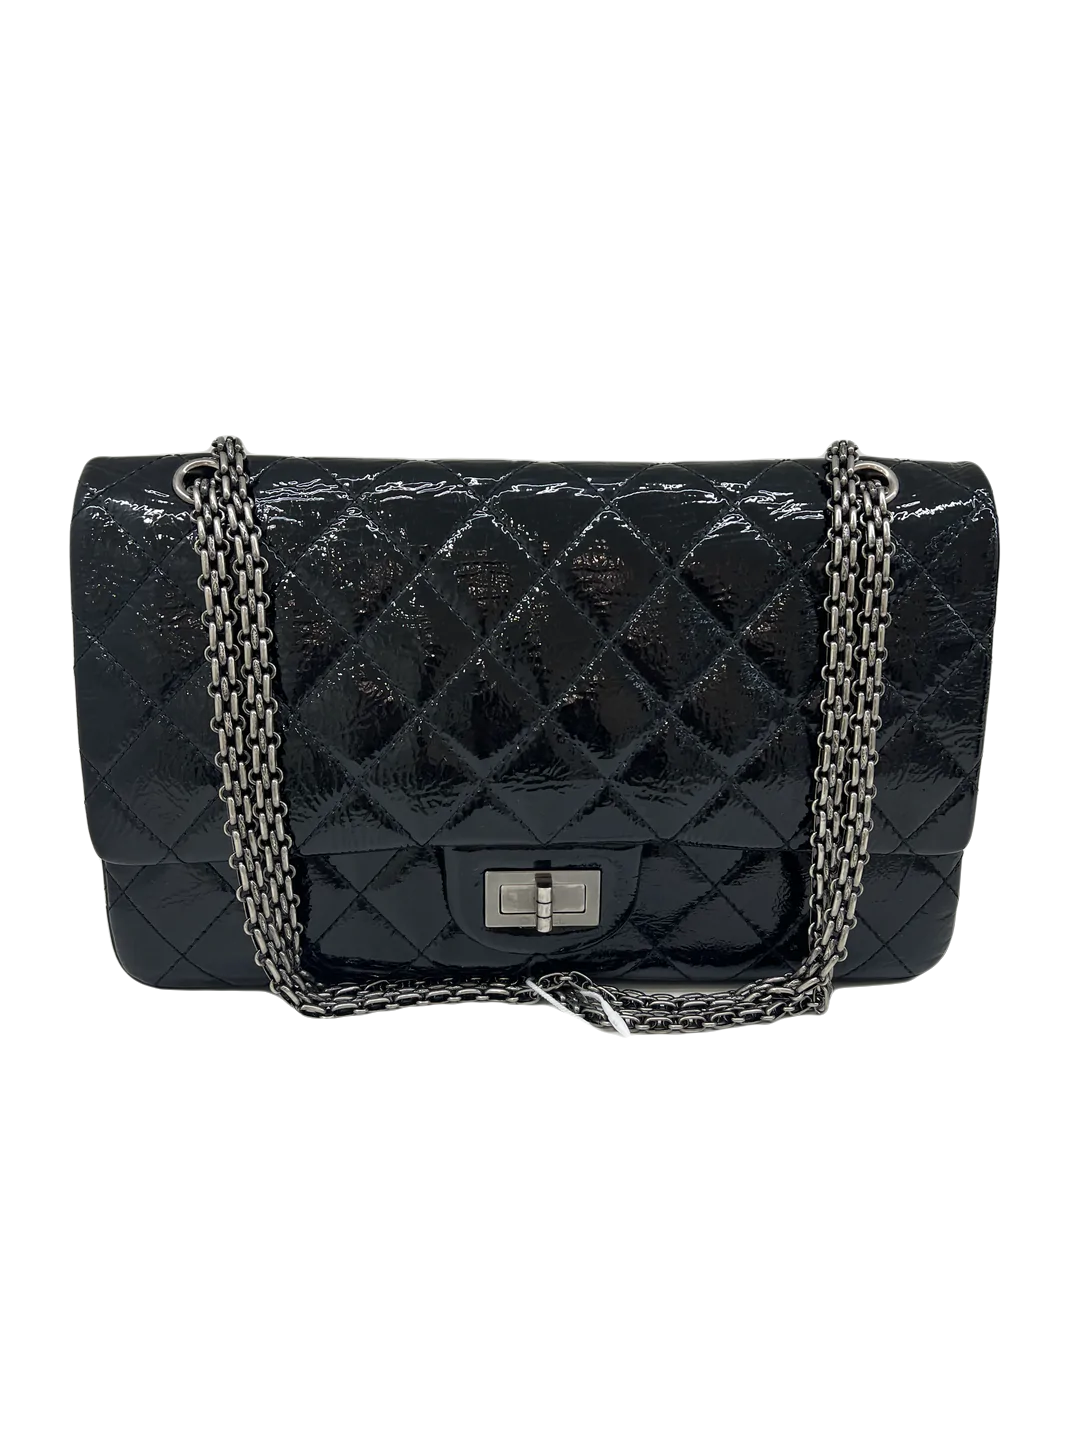 Chanel 2.55 Reissue Maxi - Black Patent - SOLD